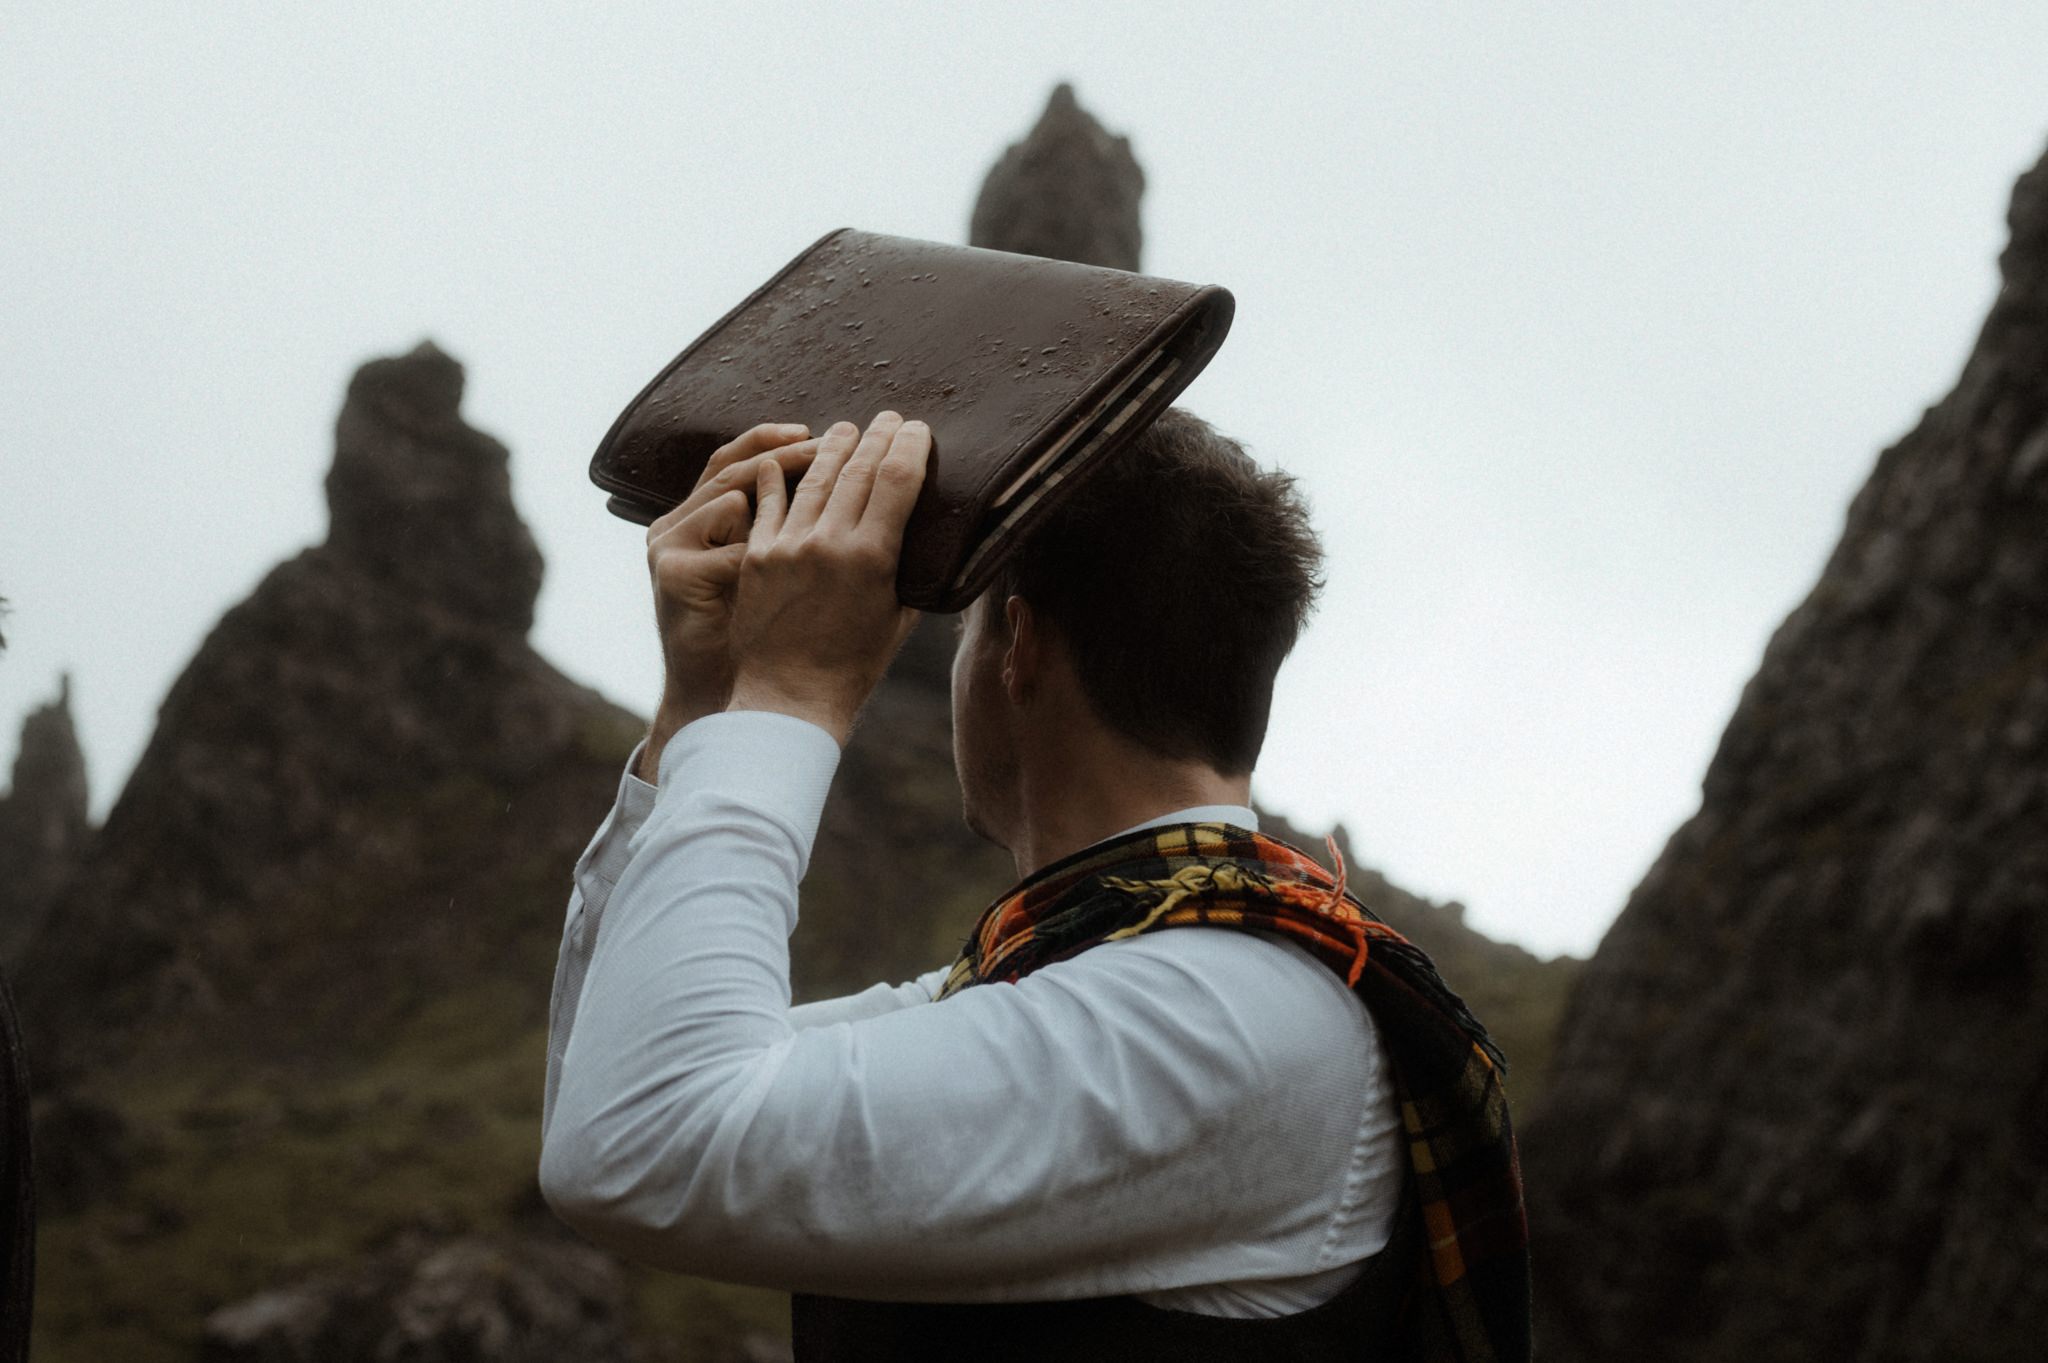 humanist celebrant Ashton Easter in Scotland conducting a ceremony on the Isle of Skye at the Old Man of Storr